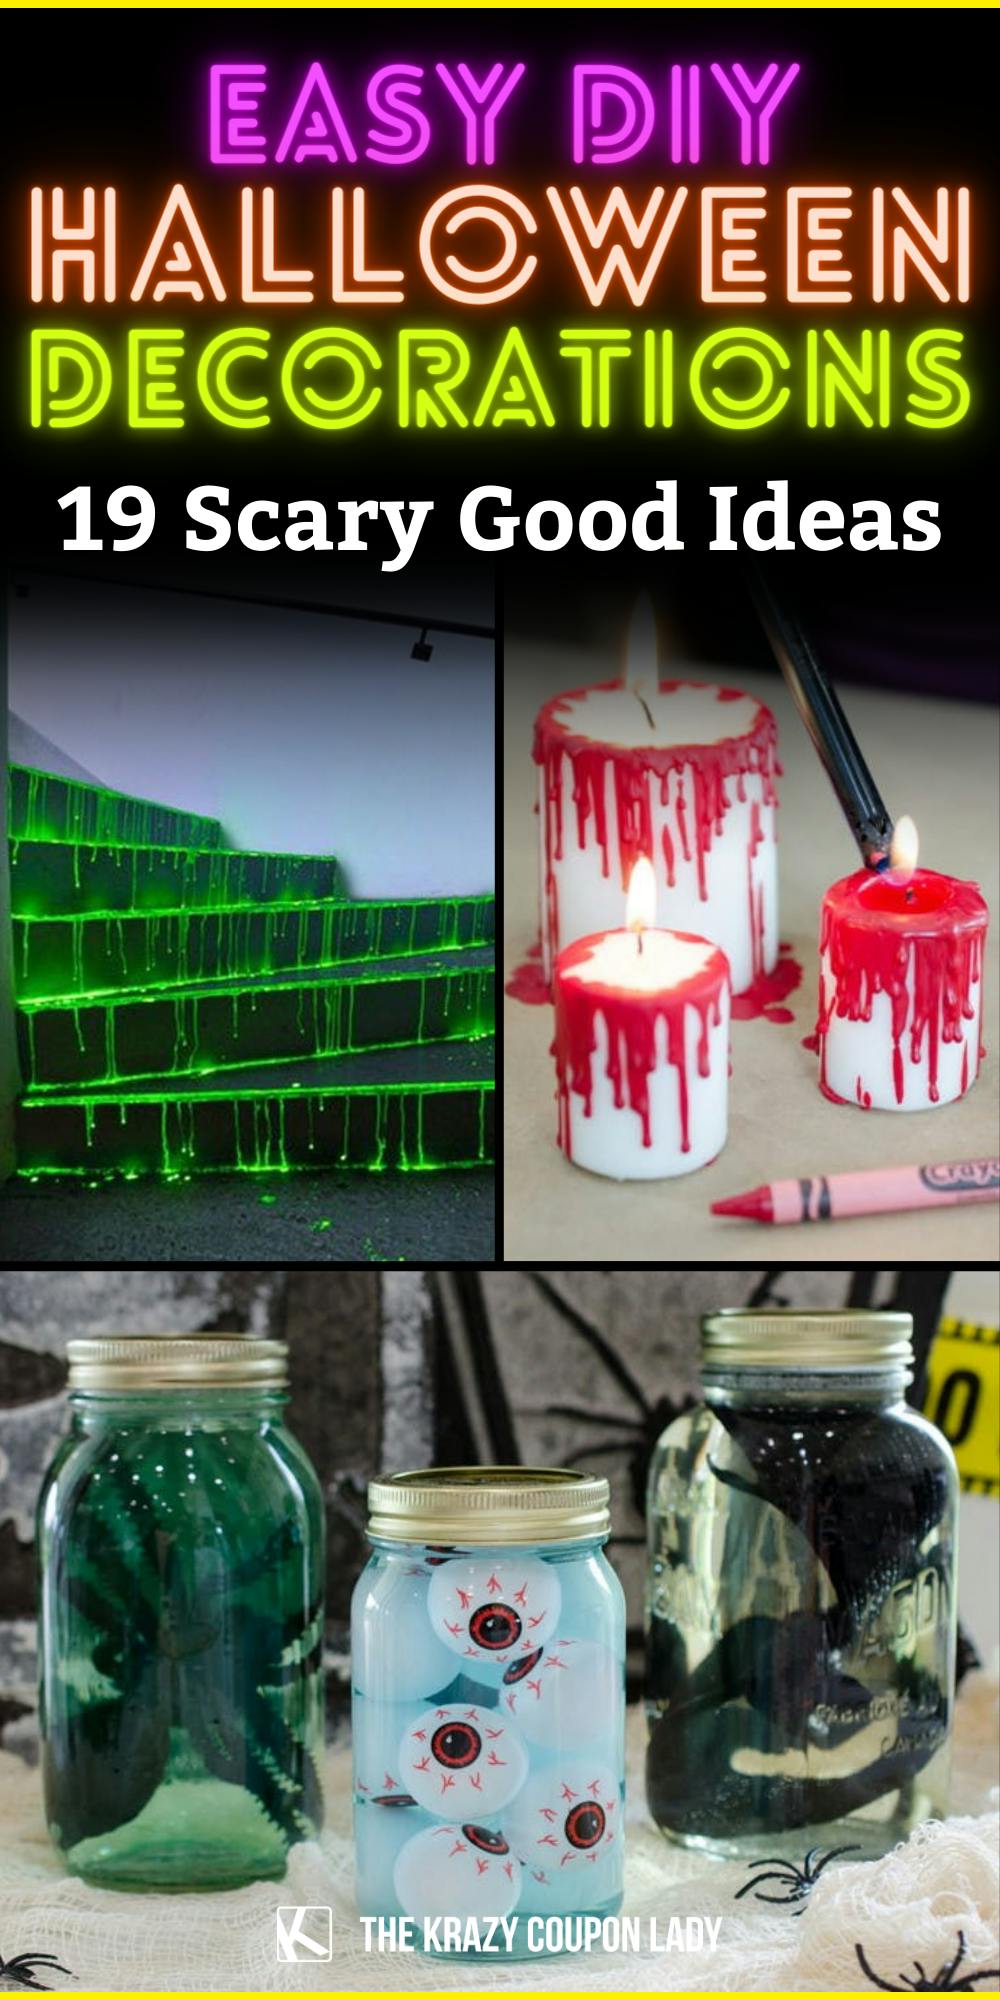 19 Inexpensive and Delightfully Easy DIY Halloween Decorations